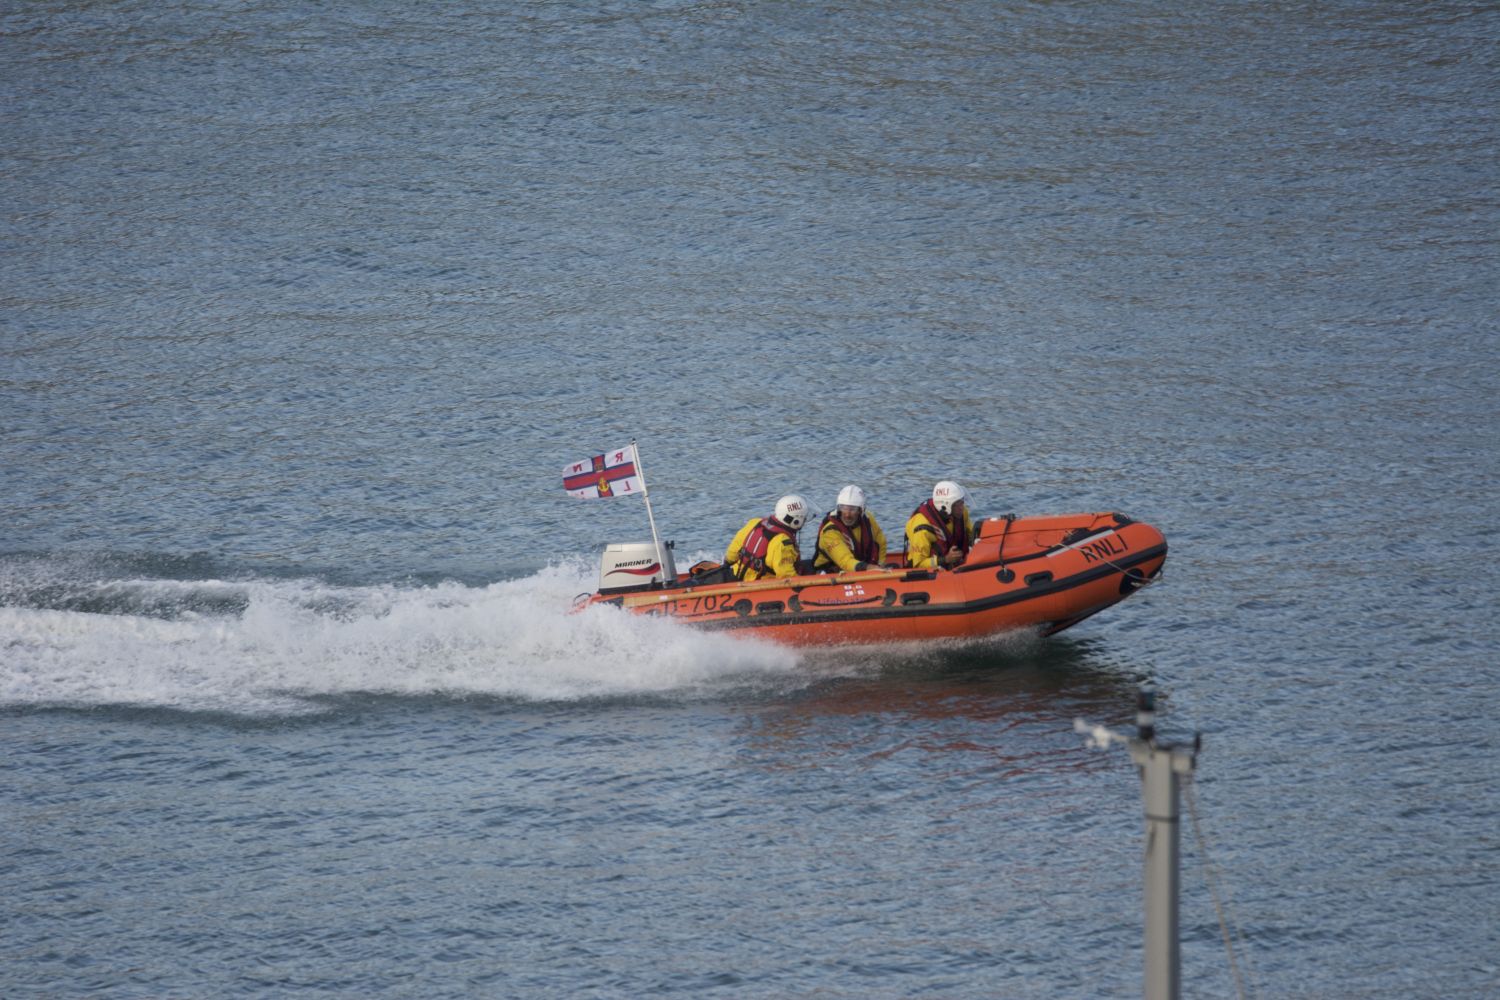 RNLI Dart D class responds to call to a man overboard